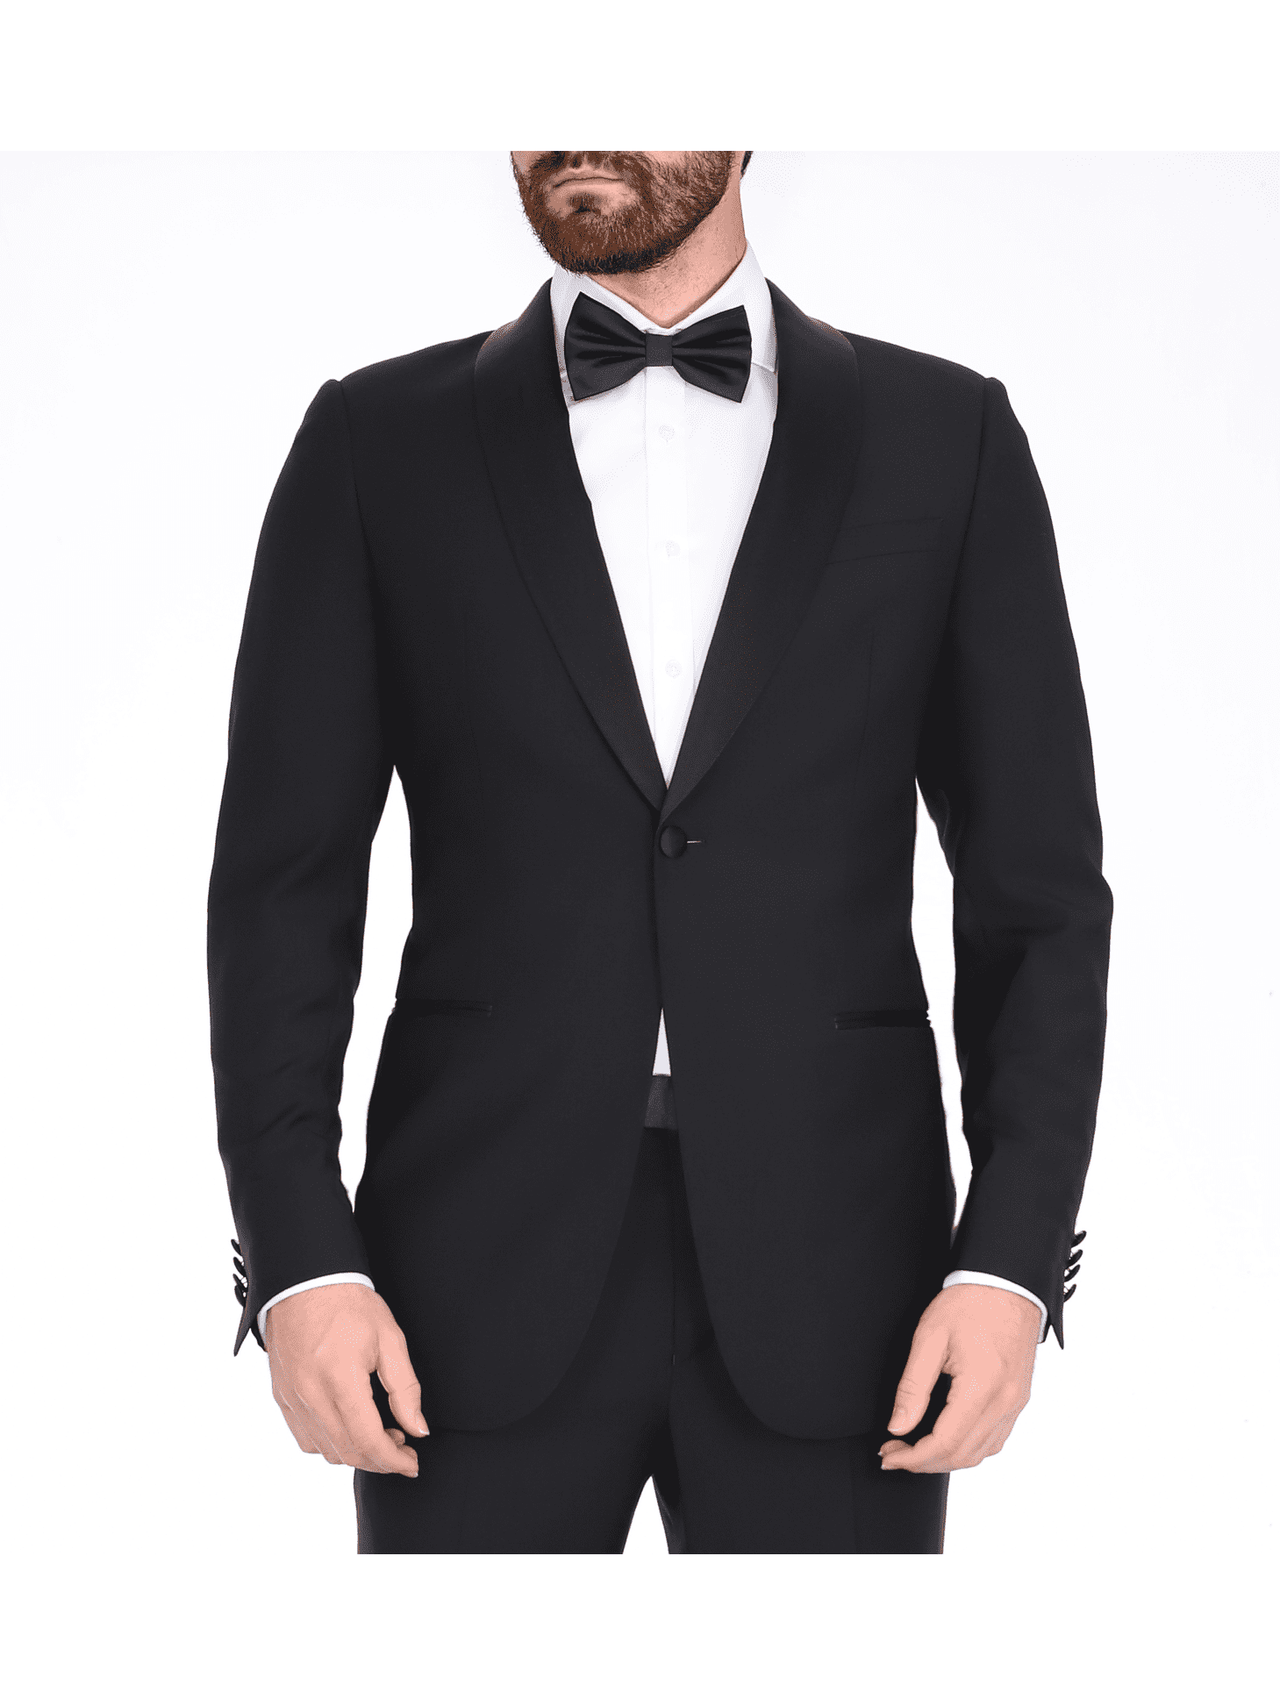 Blujacket TUXEDOS Blujacket Mens Solid Black 100% Wool Trim Fit Tuxedo Suit With Satin Shawl Lapel